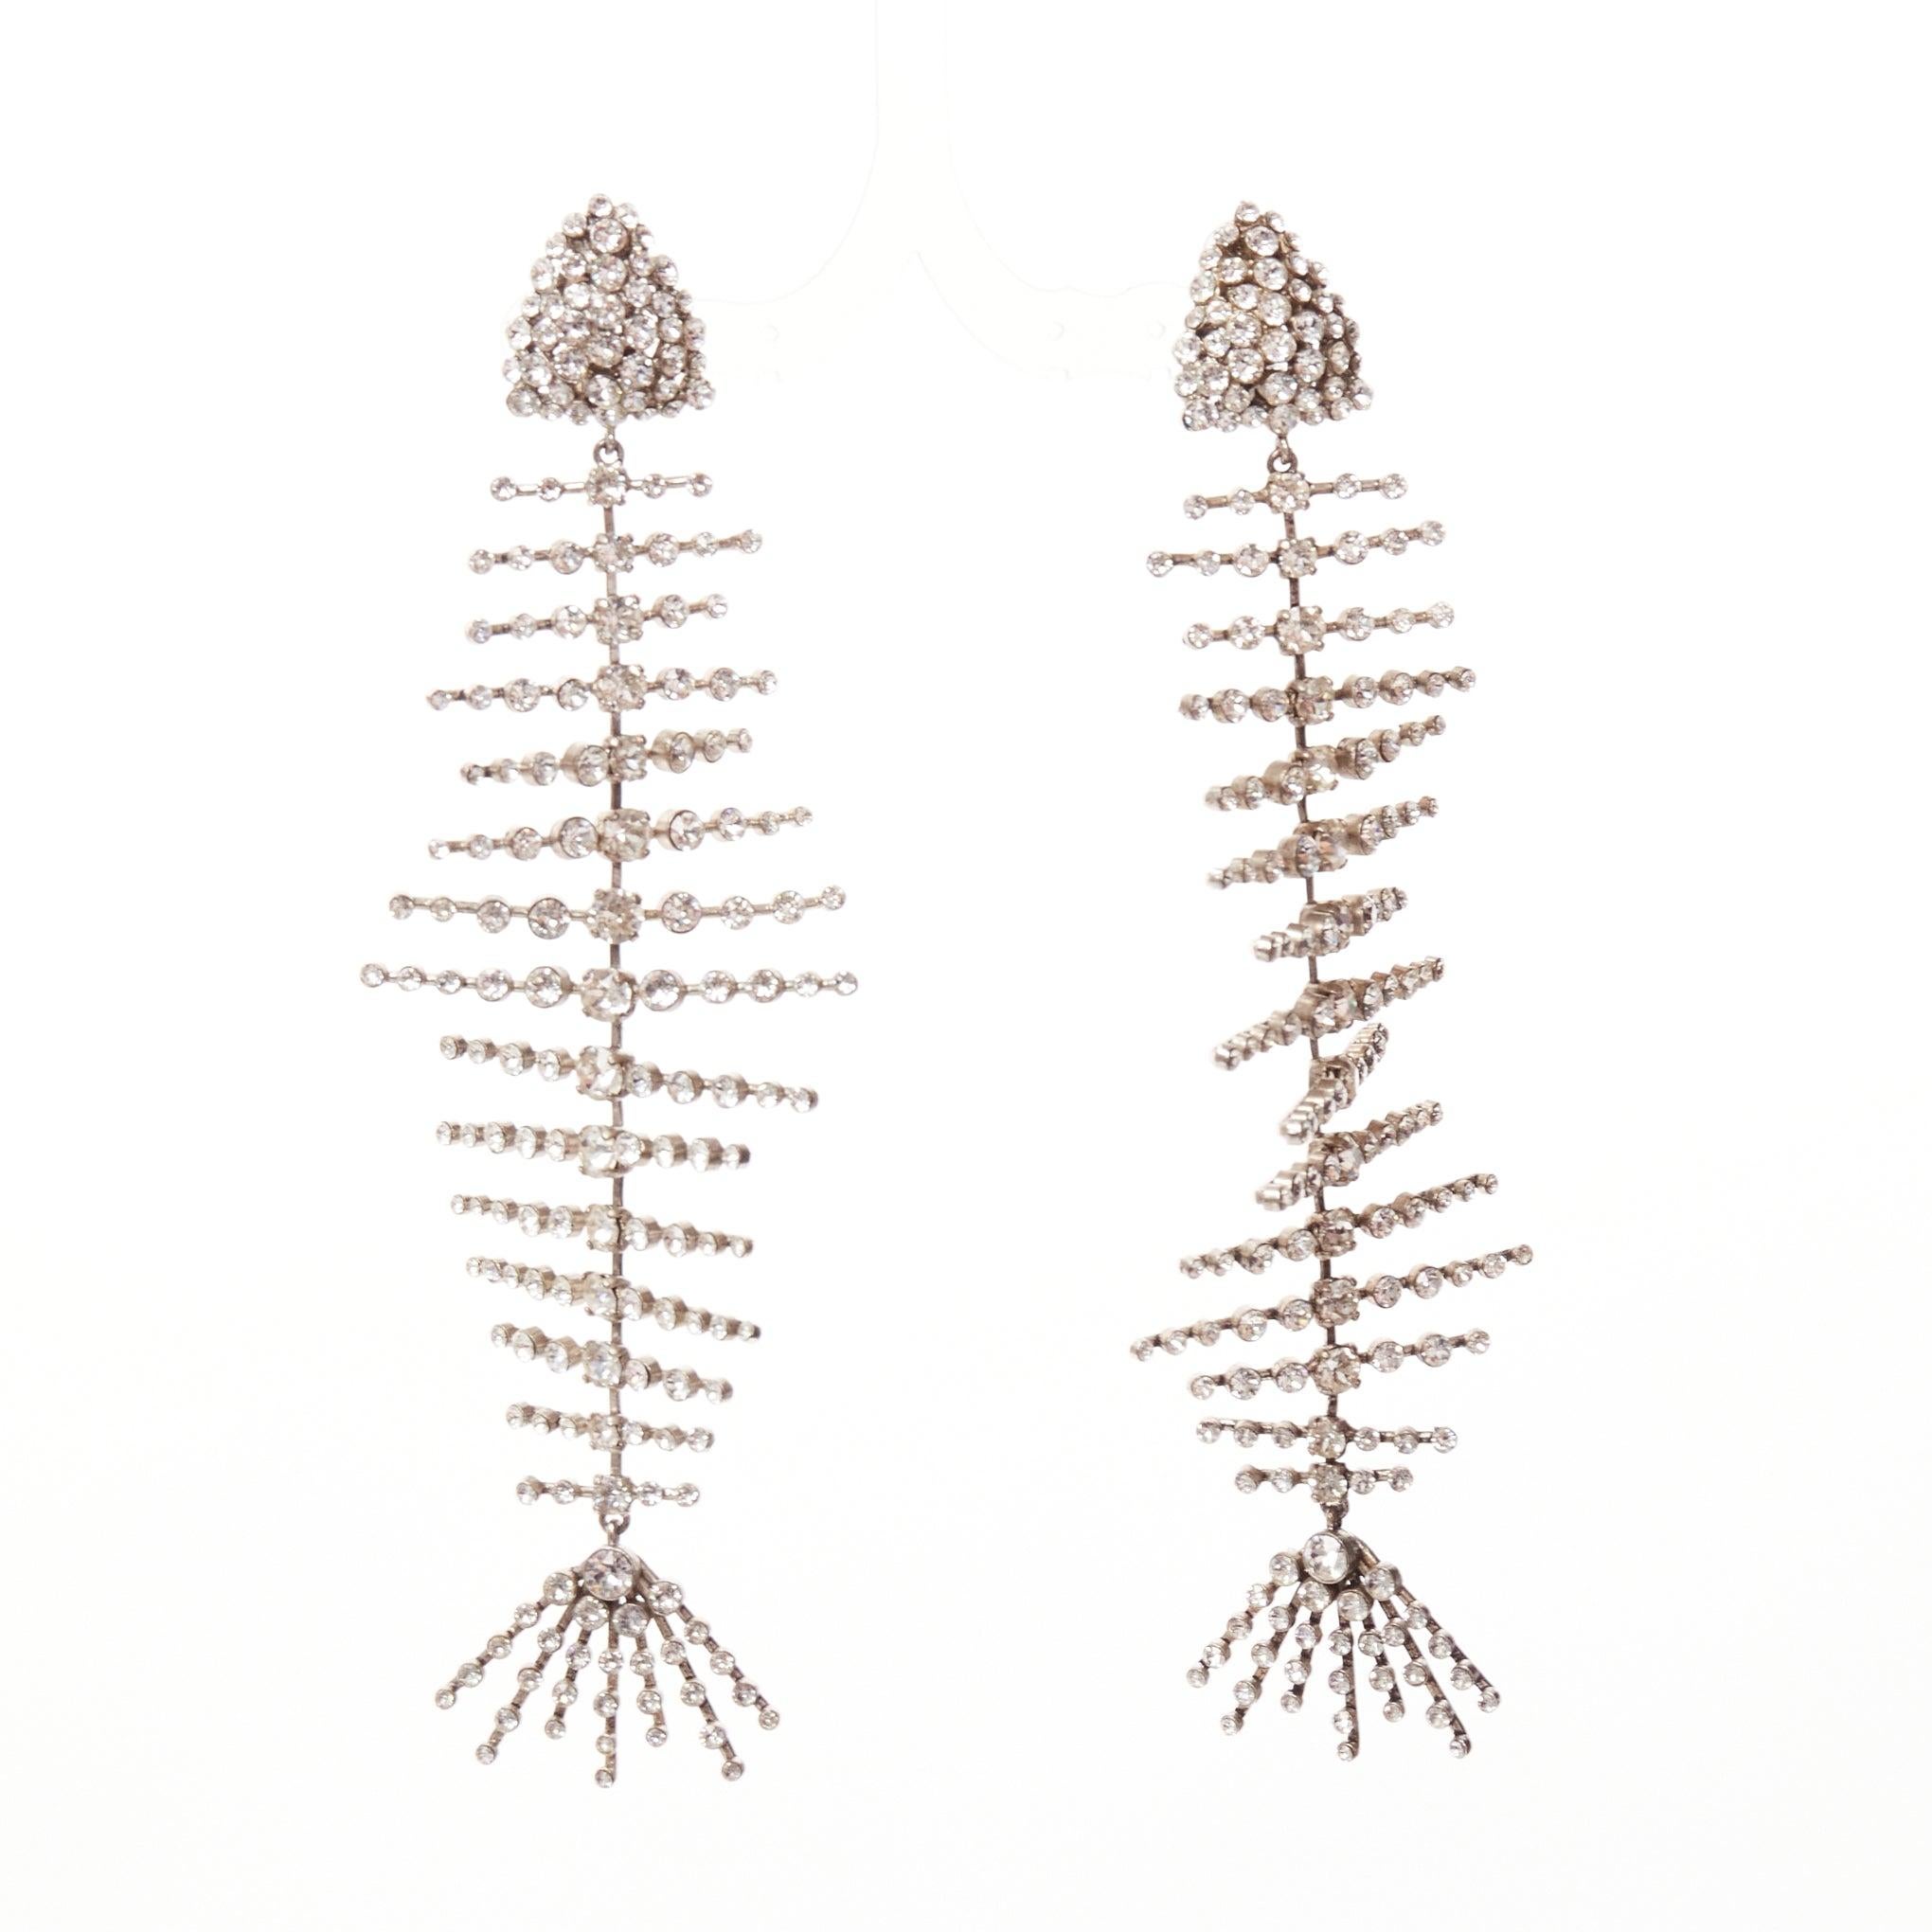 SAINT LAURENT clear crystal spiral fish bone dangling clip on earrings
Reference: AAWC/A01222
Brand: Saint Laurent
Material: Metal
Color: Silver
Pattern: Crystals
Closure: Clip On
Lining: Silver Metal
Extra Details: YSL logo